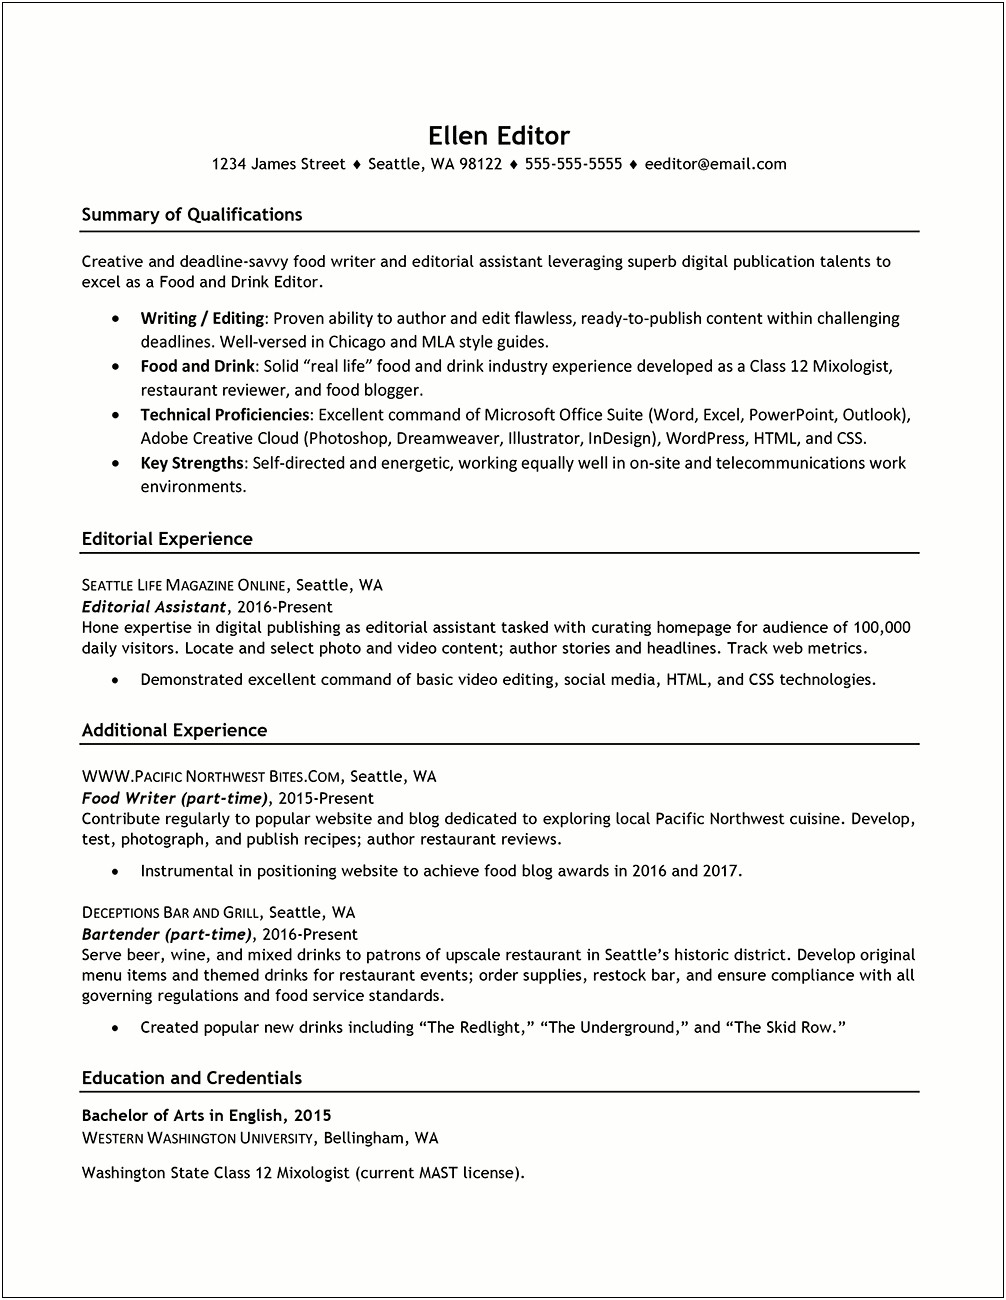 Do You Include Temporary Jobs On Resume